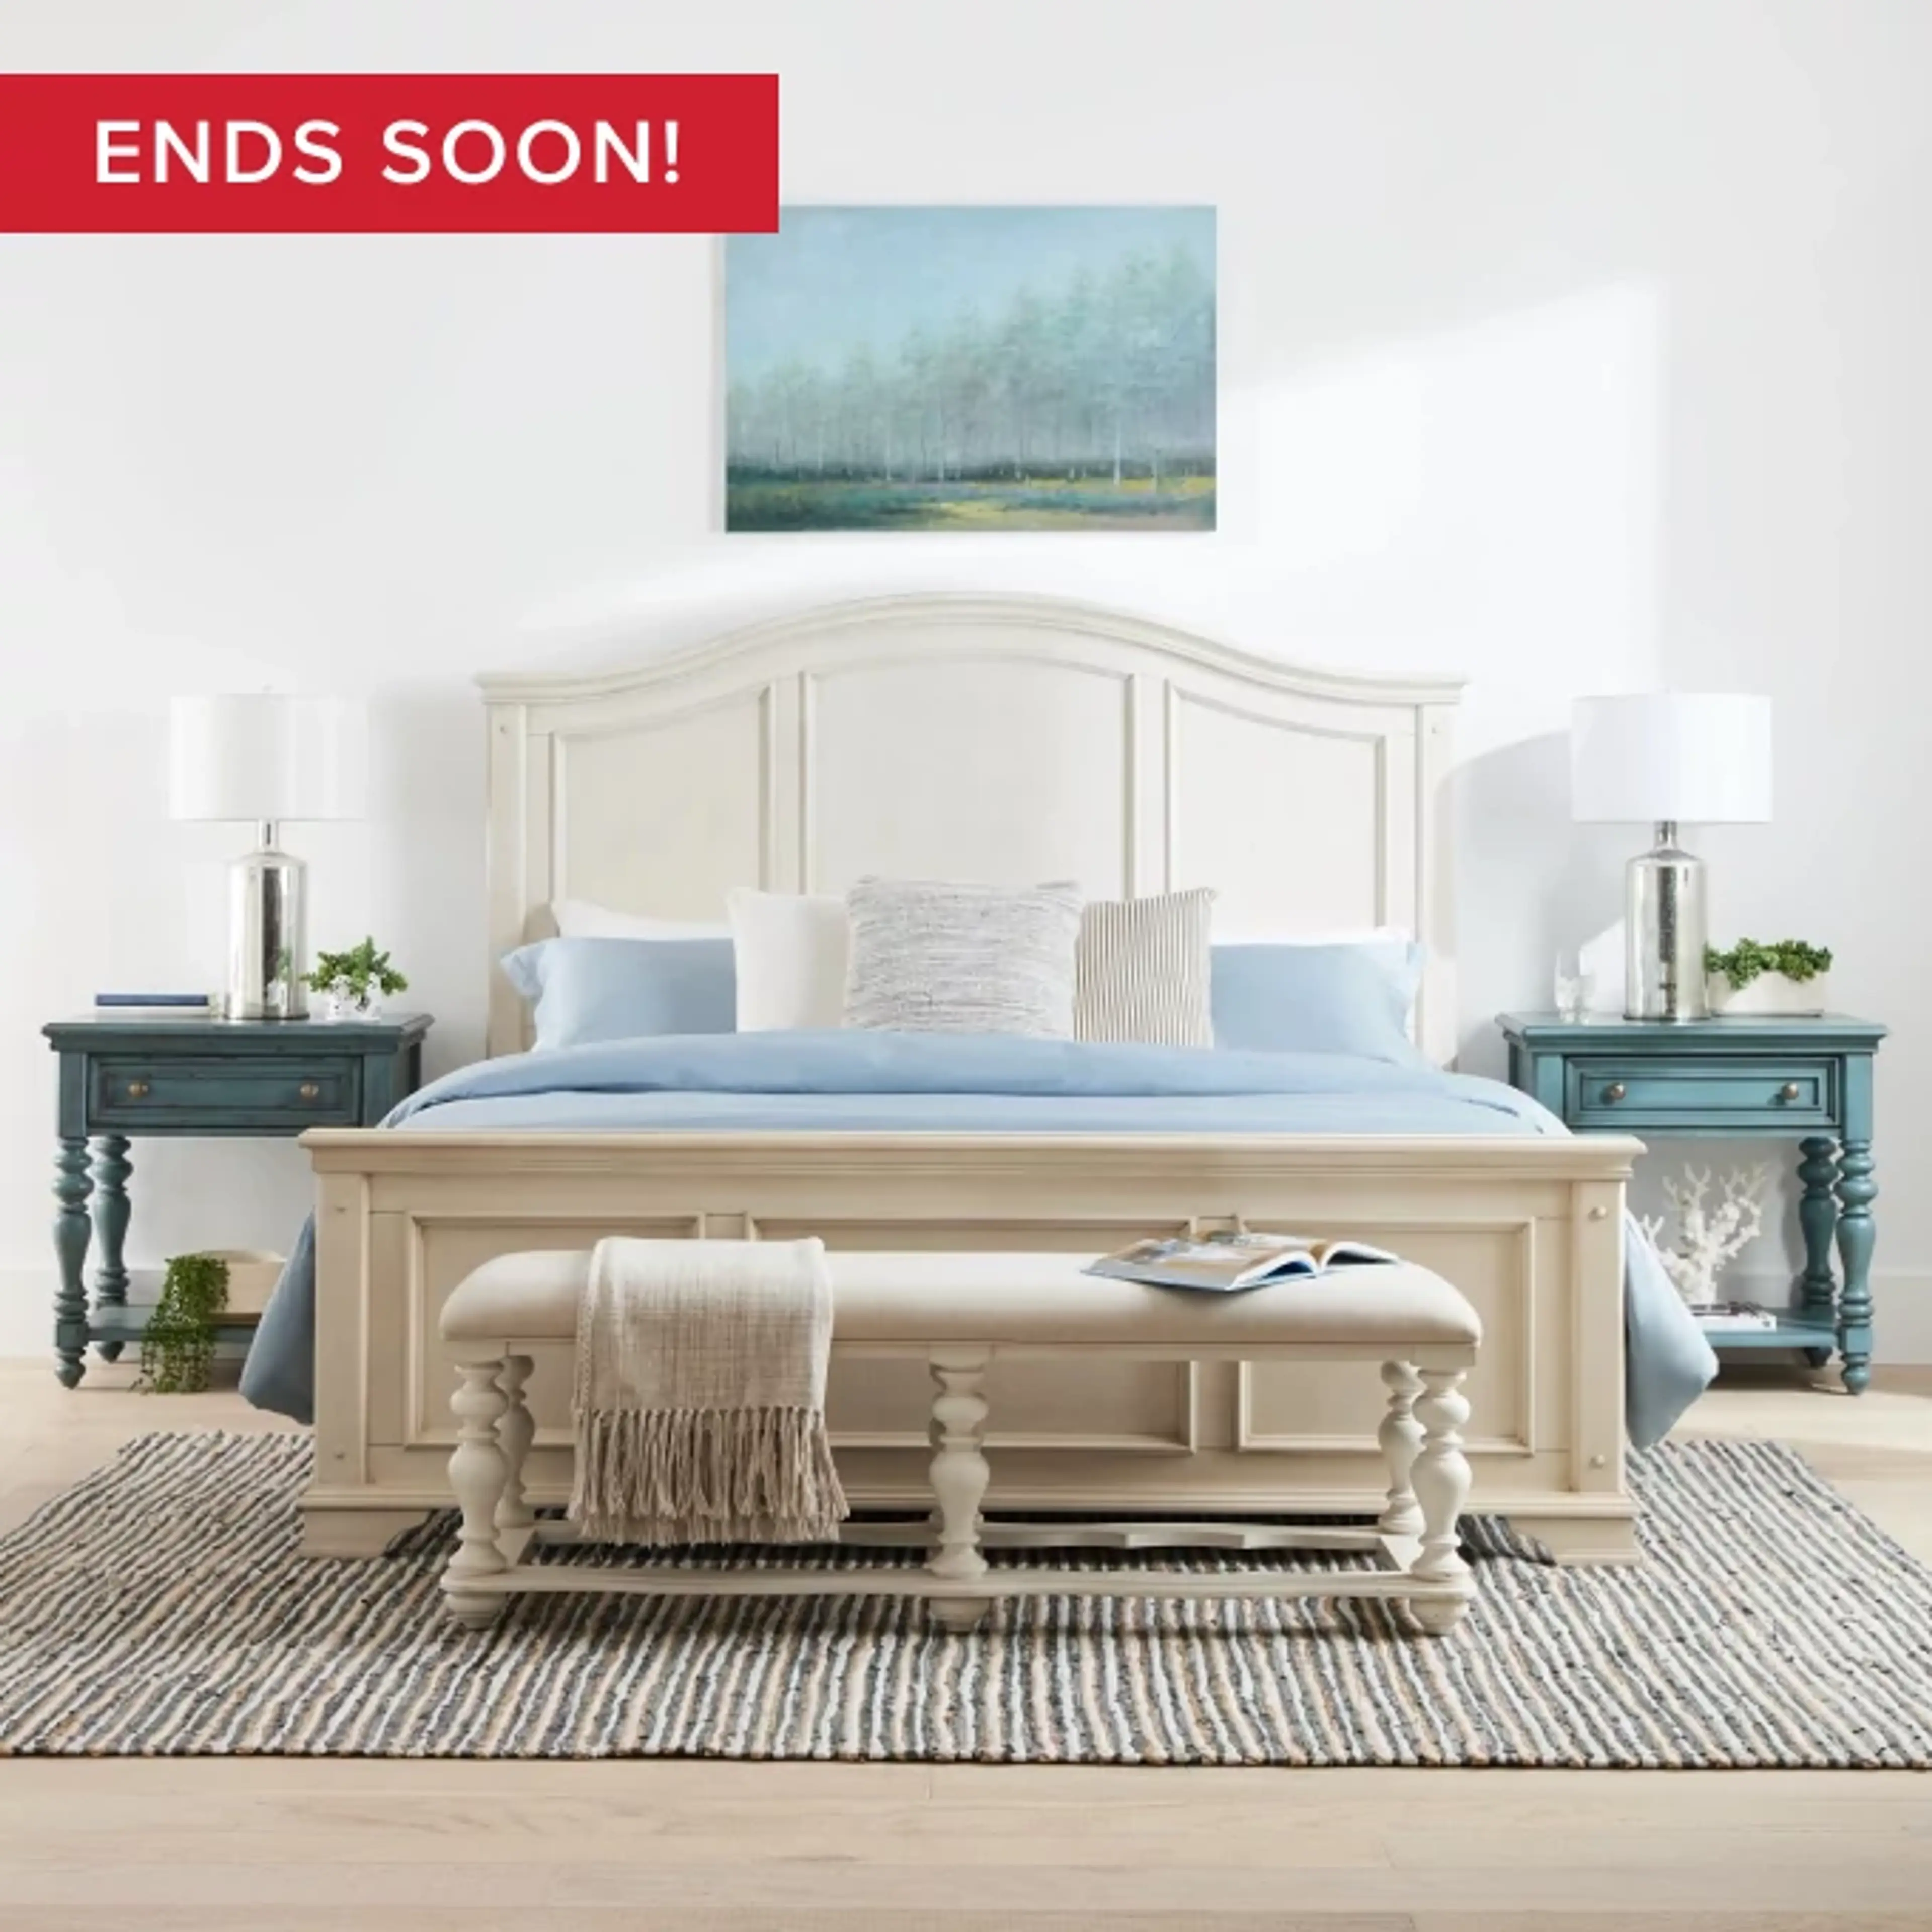 UP TO 20% OFF BEDS*